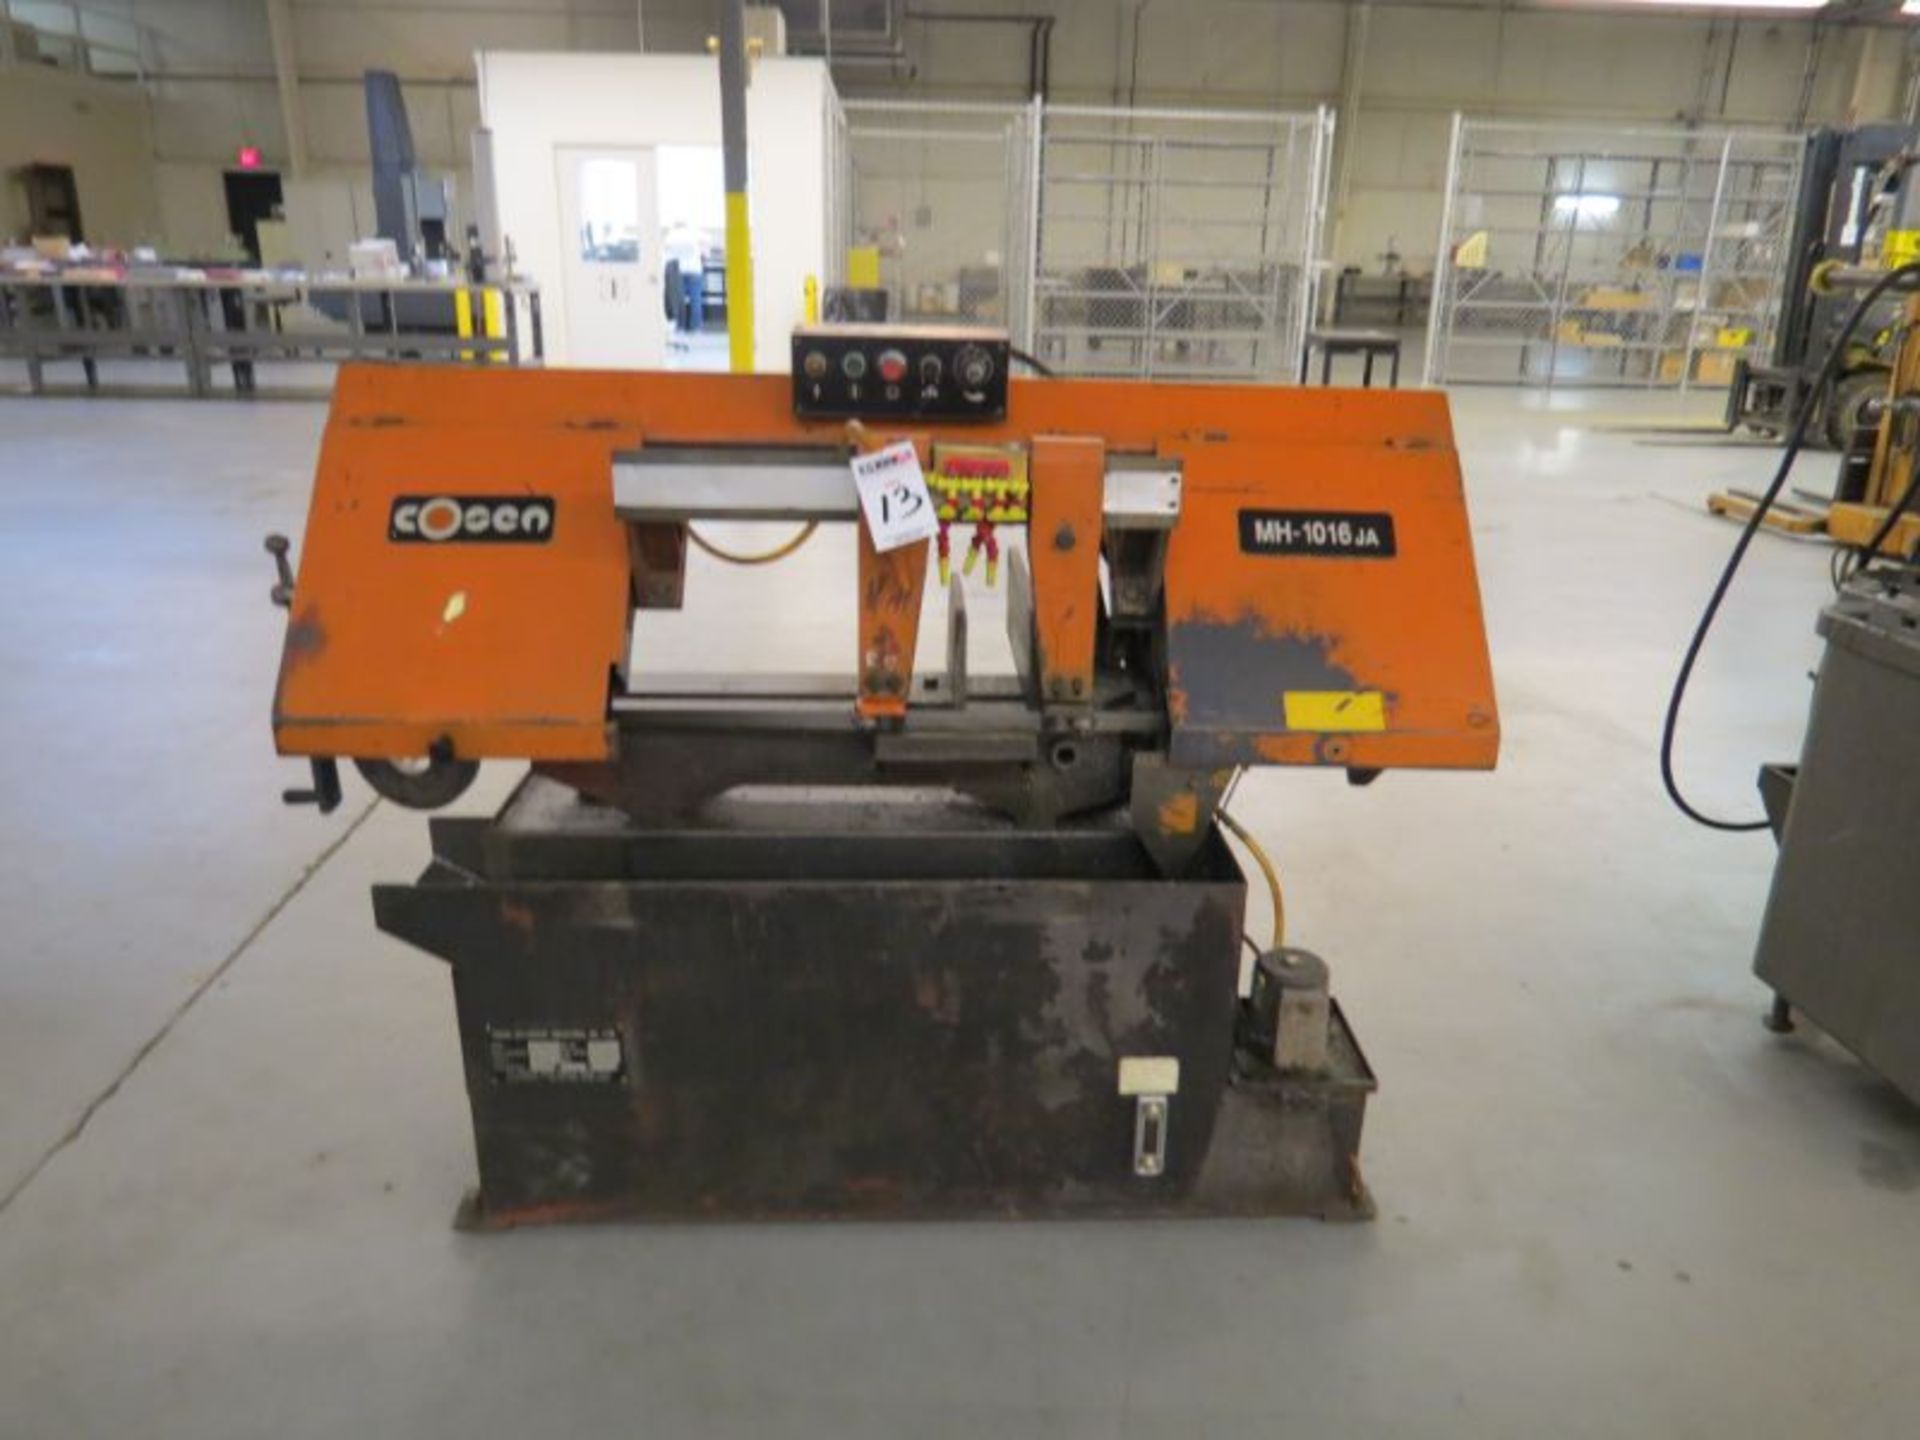 Cosen MH-1016 Horizontal Band Saw, 3350mm x 27mm x 0.9mm, 2 HP, S/N 93106063, New 2004 - Image 2 of 4